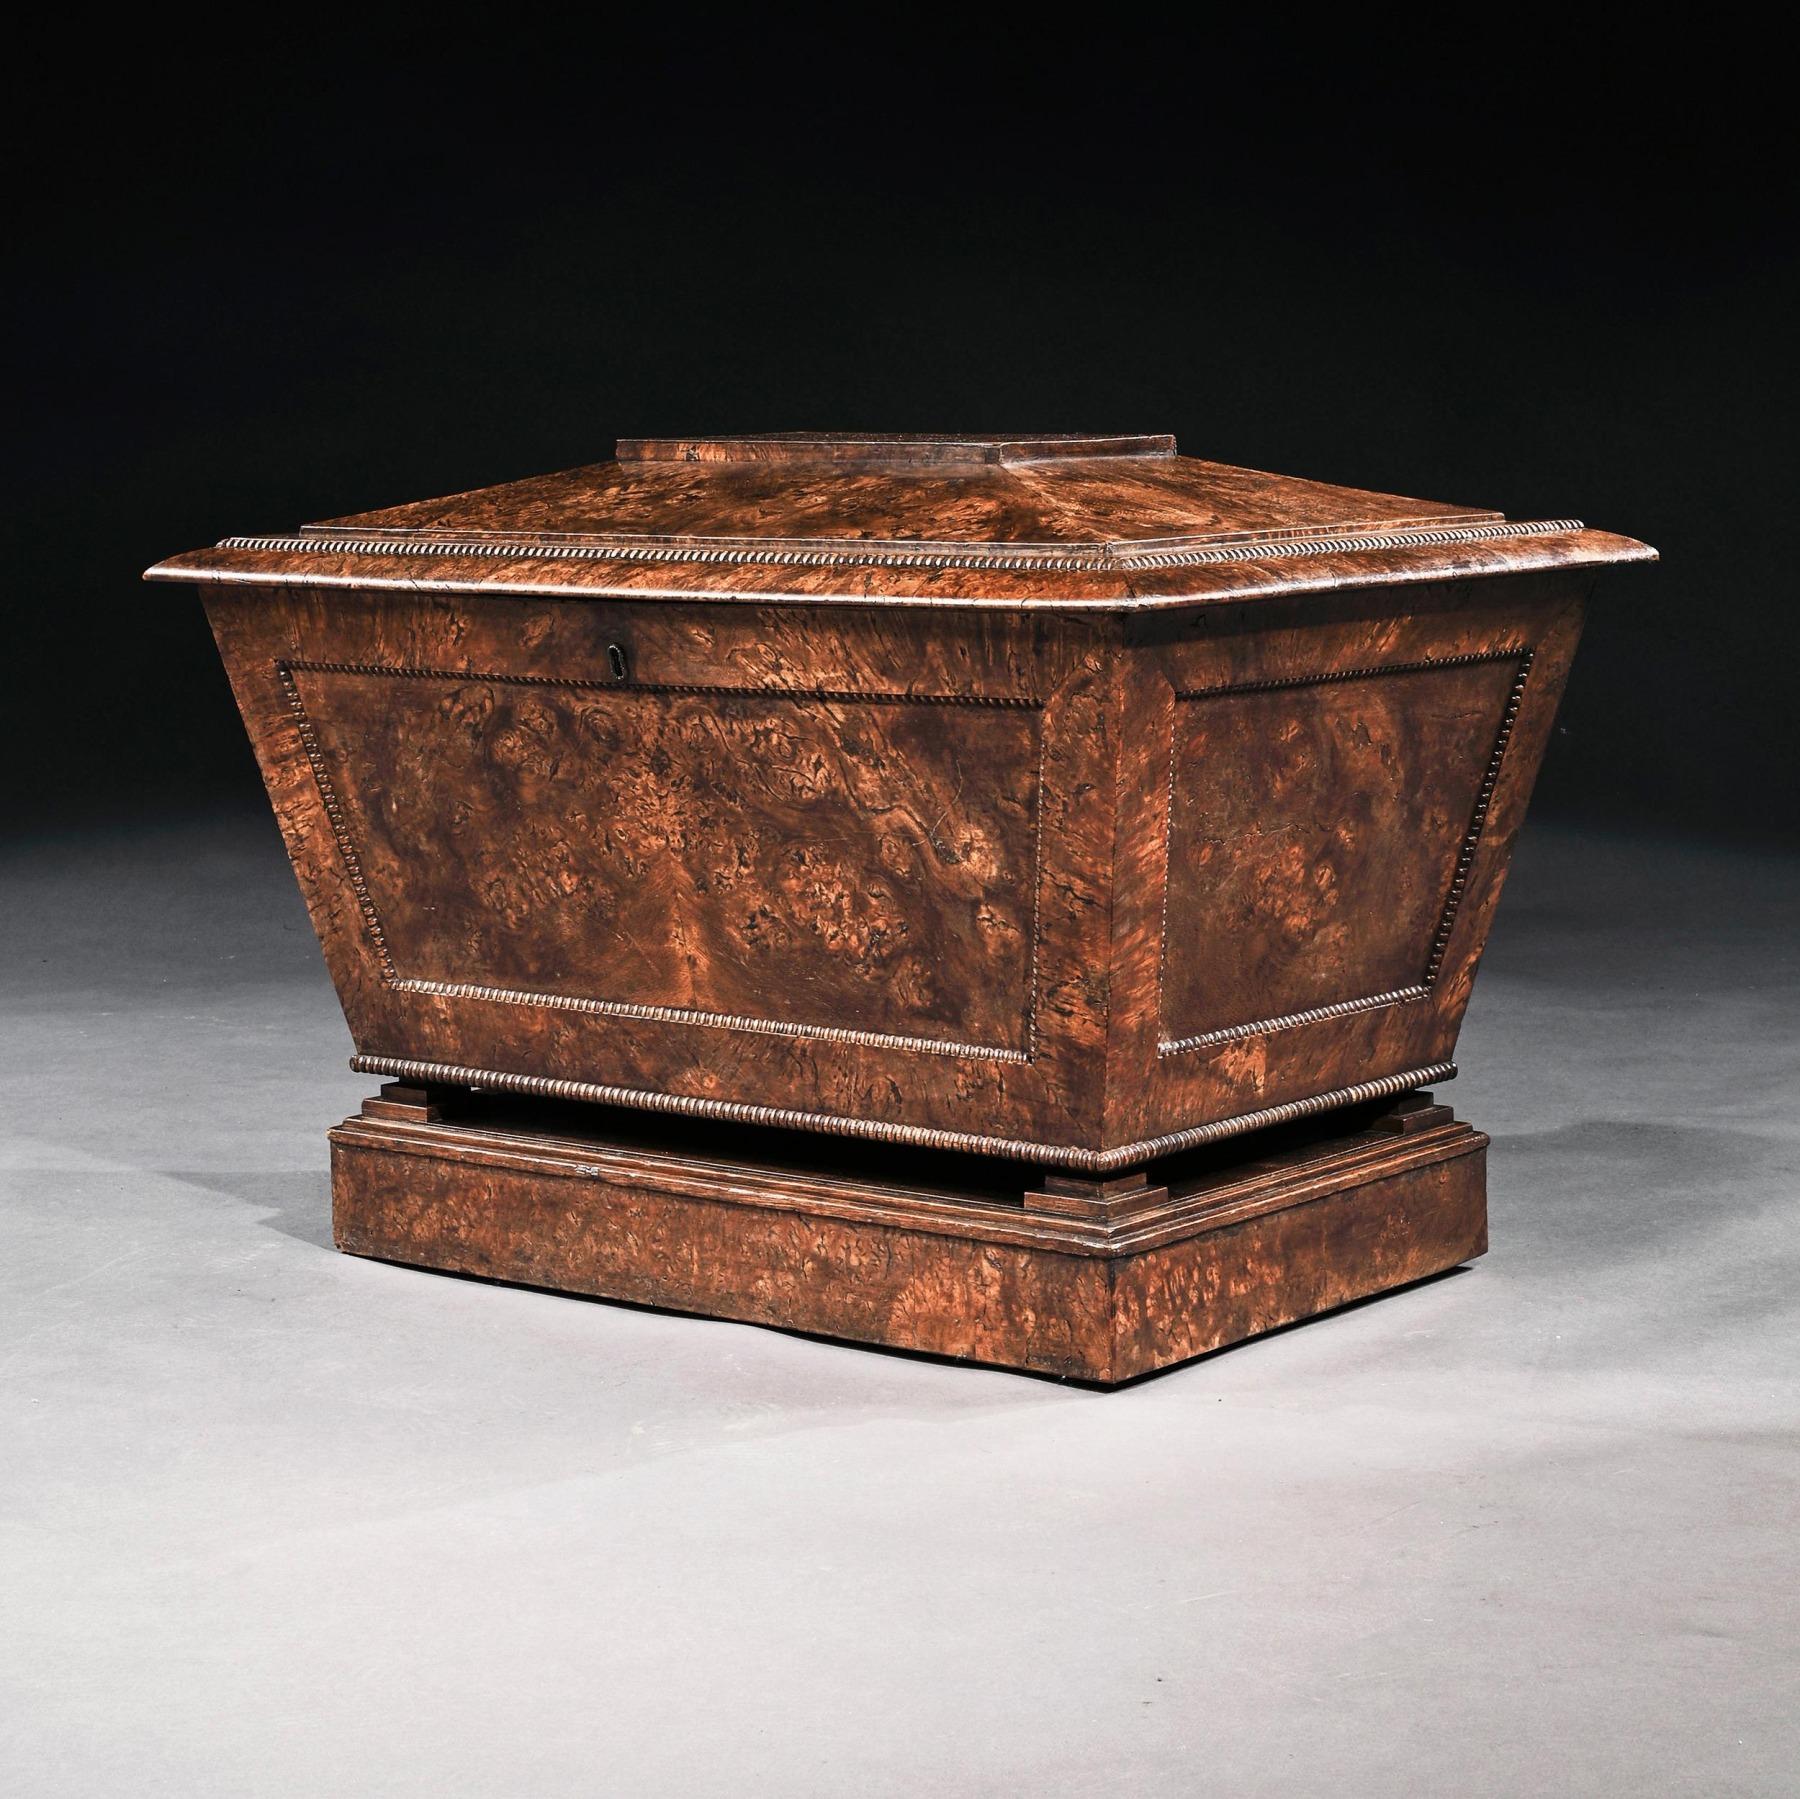 Captivating English late Regency period pollard oak cellarette - wine cooler of substantial proportions having the most enchanted untouched color and patina ‘skin’.

English - George IV, circa 1825.

A wonderful object, almost art like for the